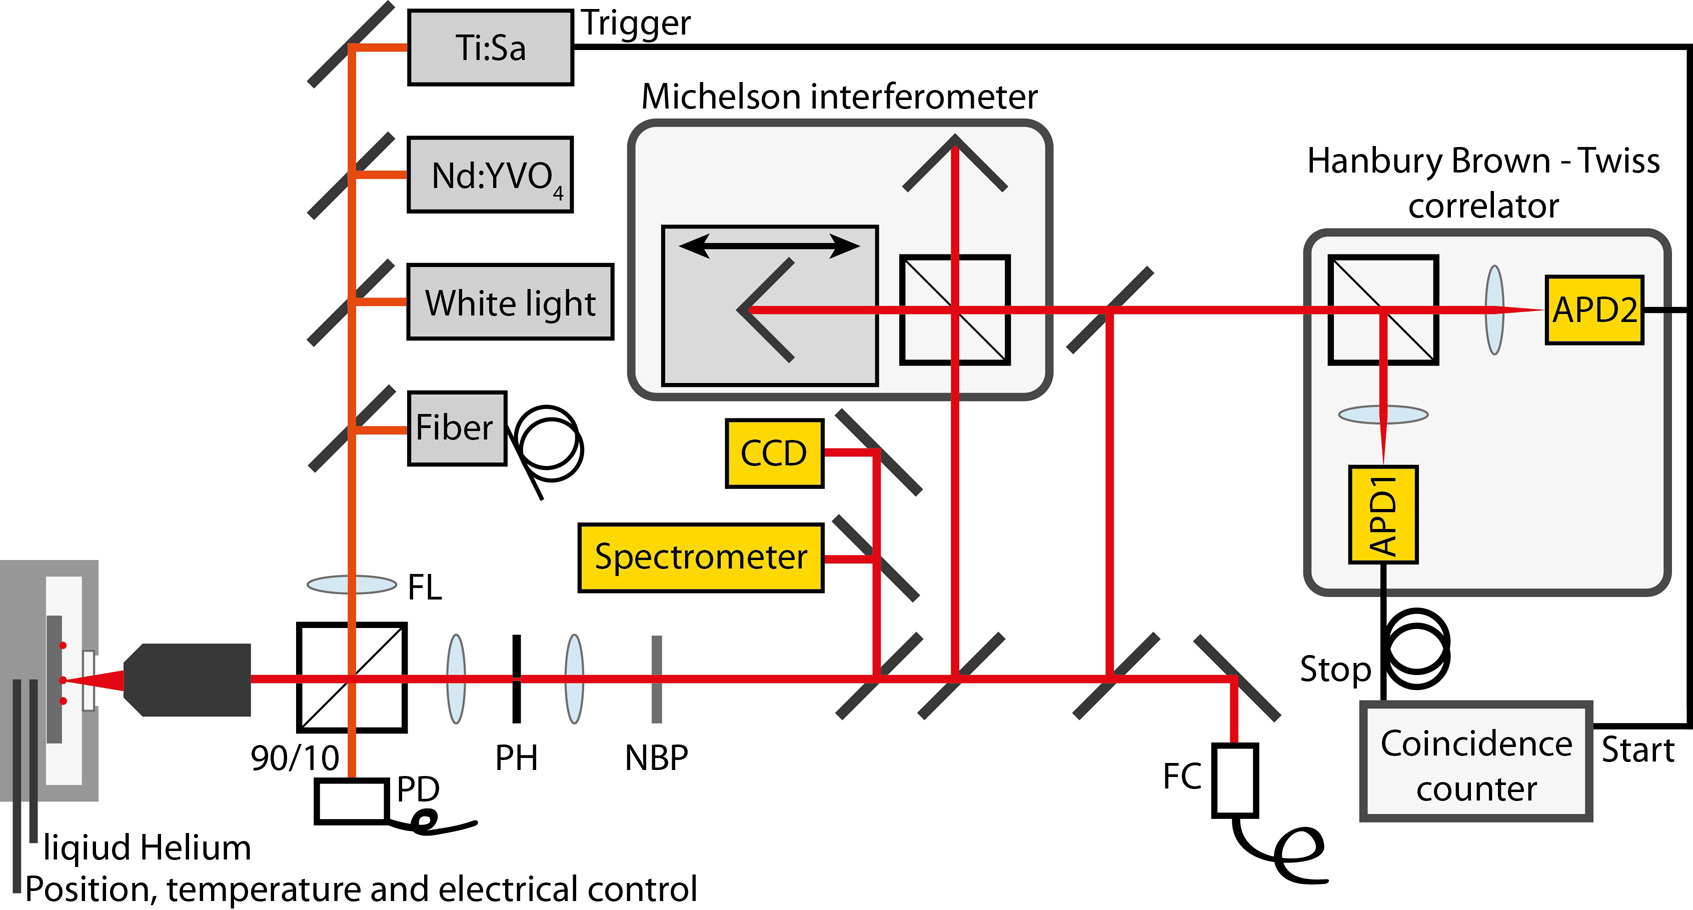 Fig1.1: Implemented characterization setup for single photon emission